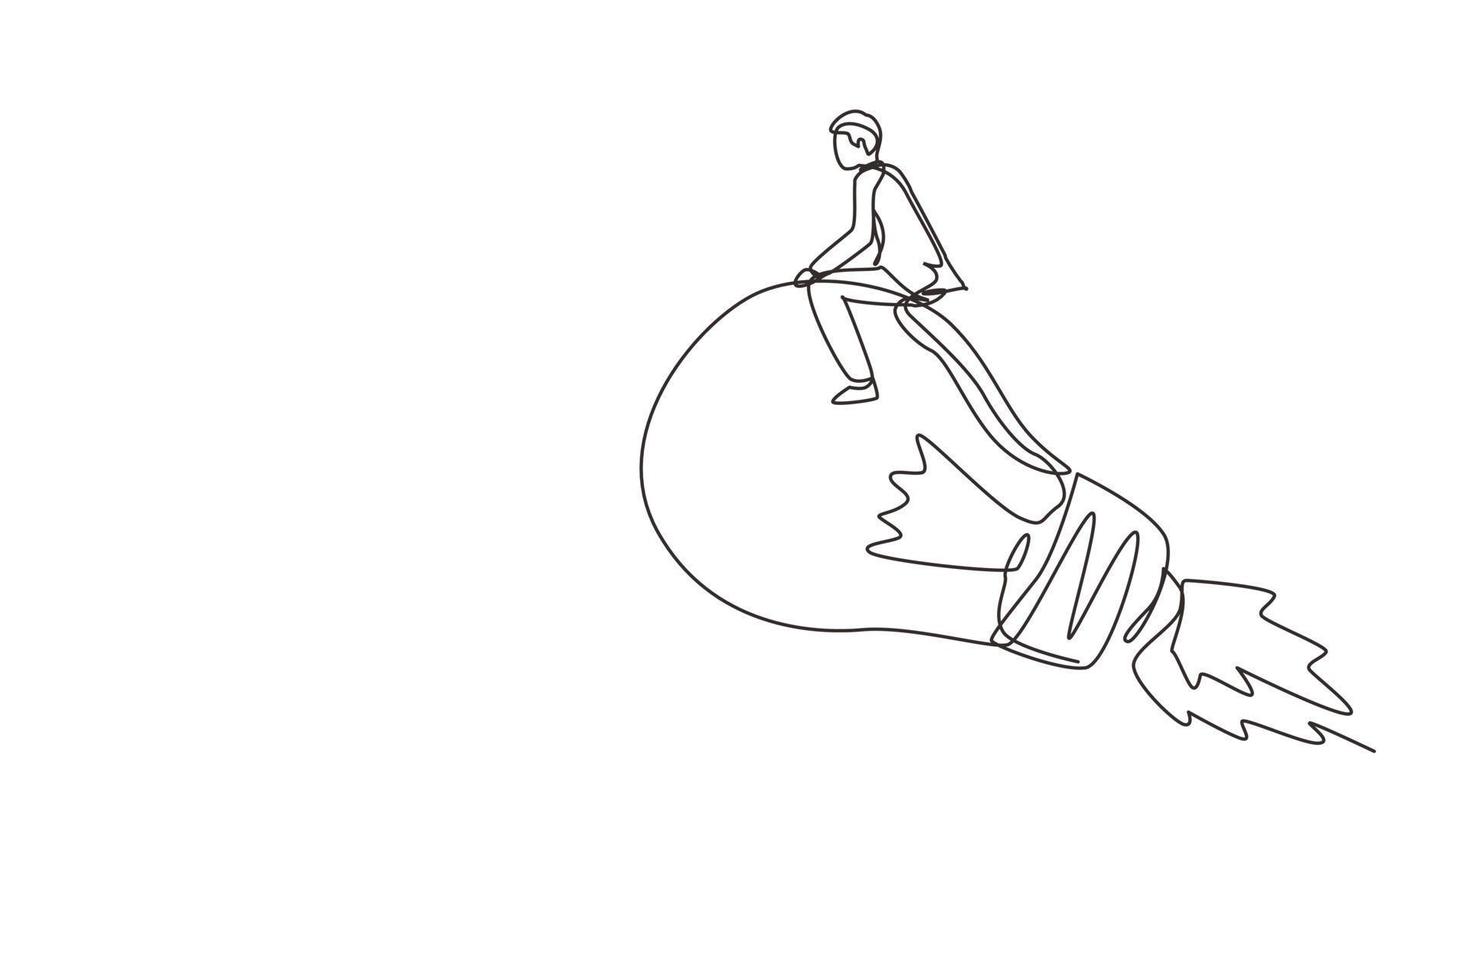 Single one line drawing businessman riding idea light bulb flying through sky. Creative new idea, innovation start up business to achieve success goal. Continuous line draw design vector illustration